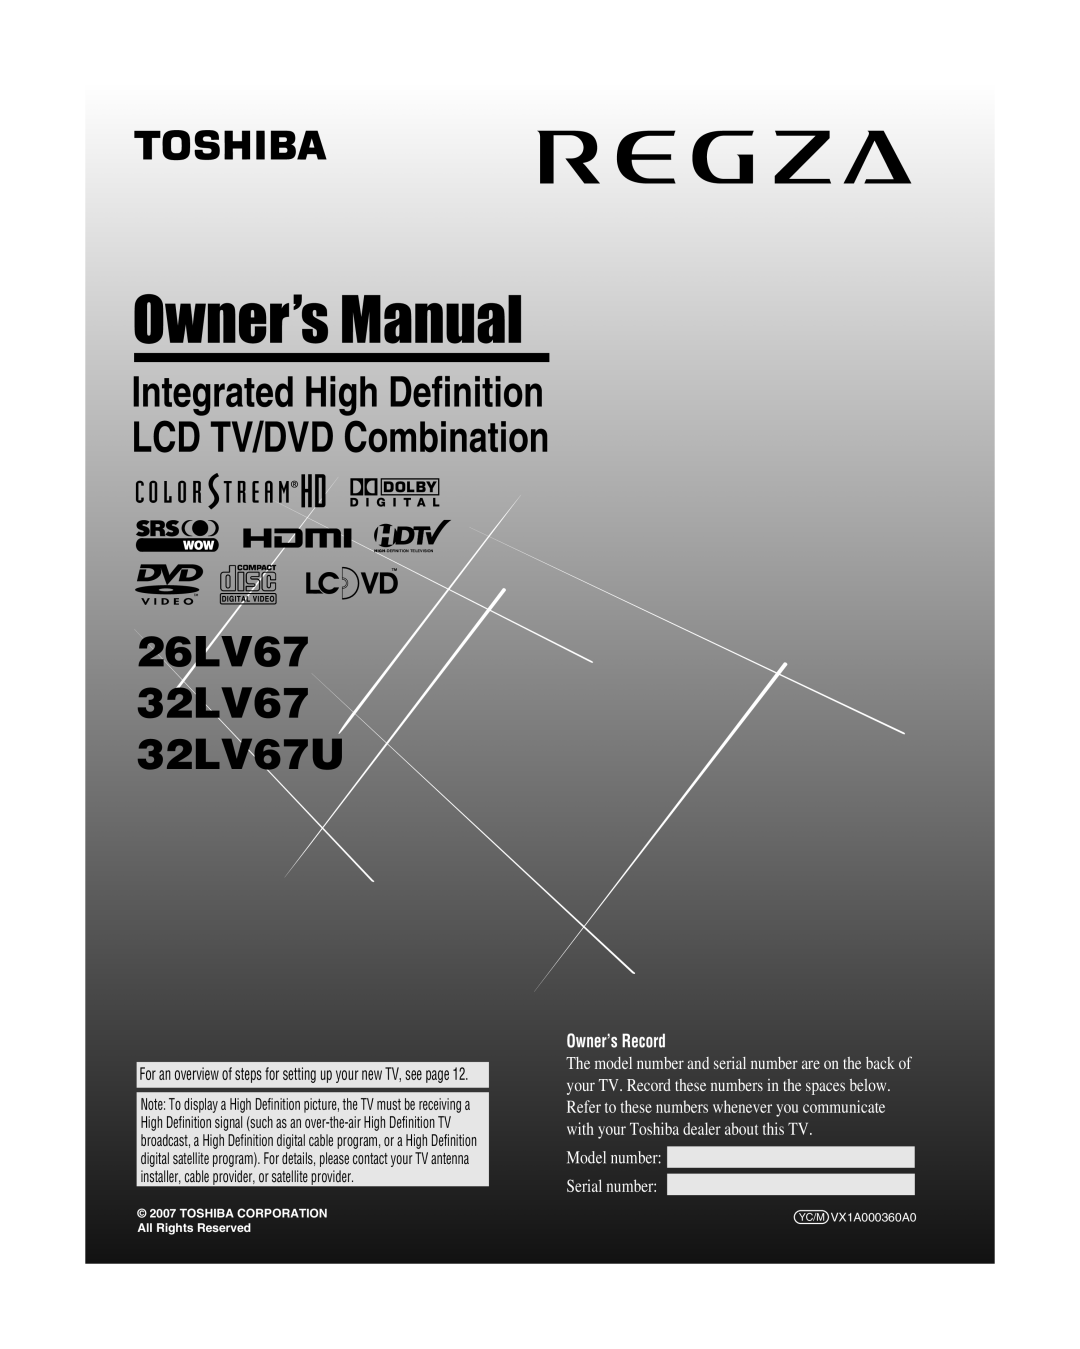 Toshiba manual For an overview of steps for setting up your new TV, see page, 26LV67 32LV67 32LV67U, Owner’s Record 